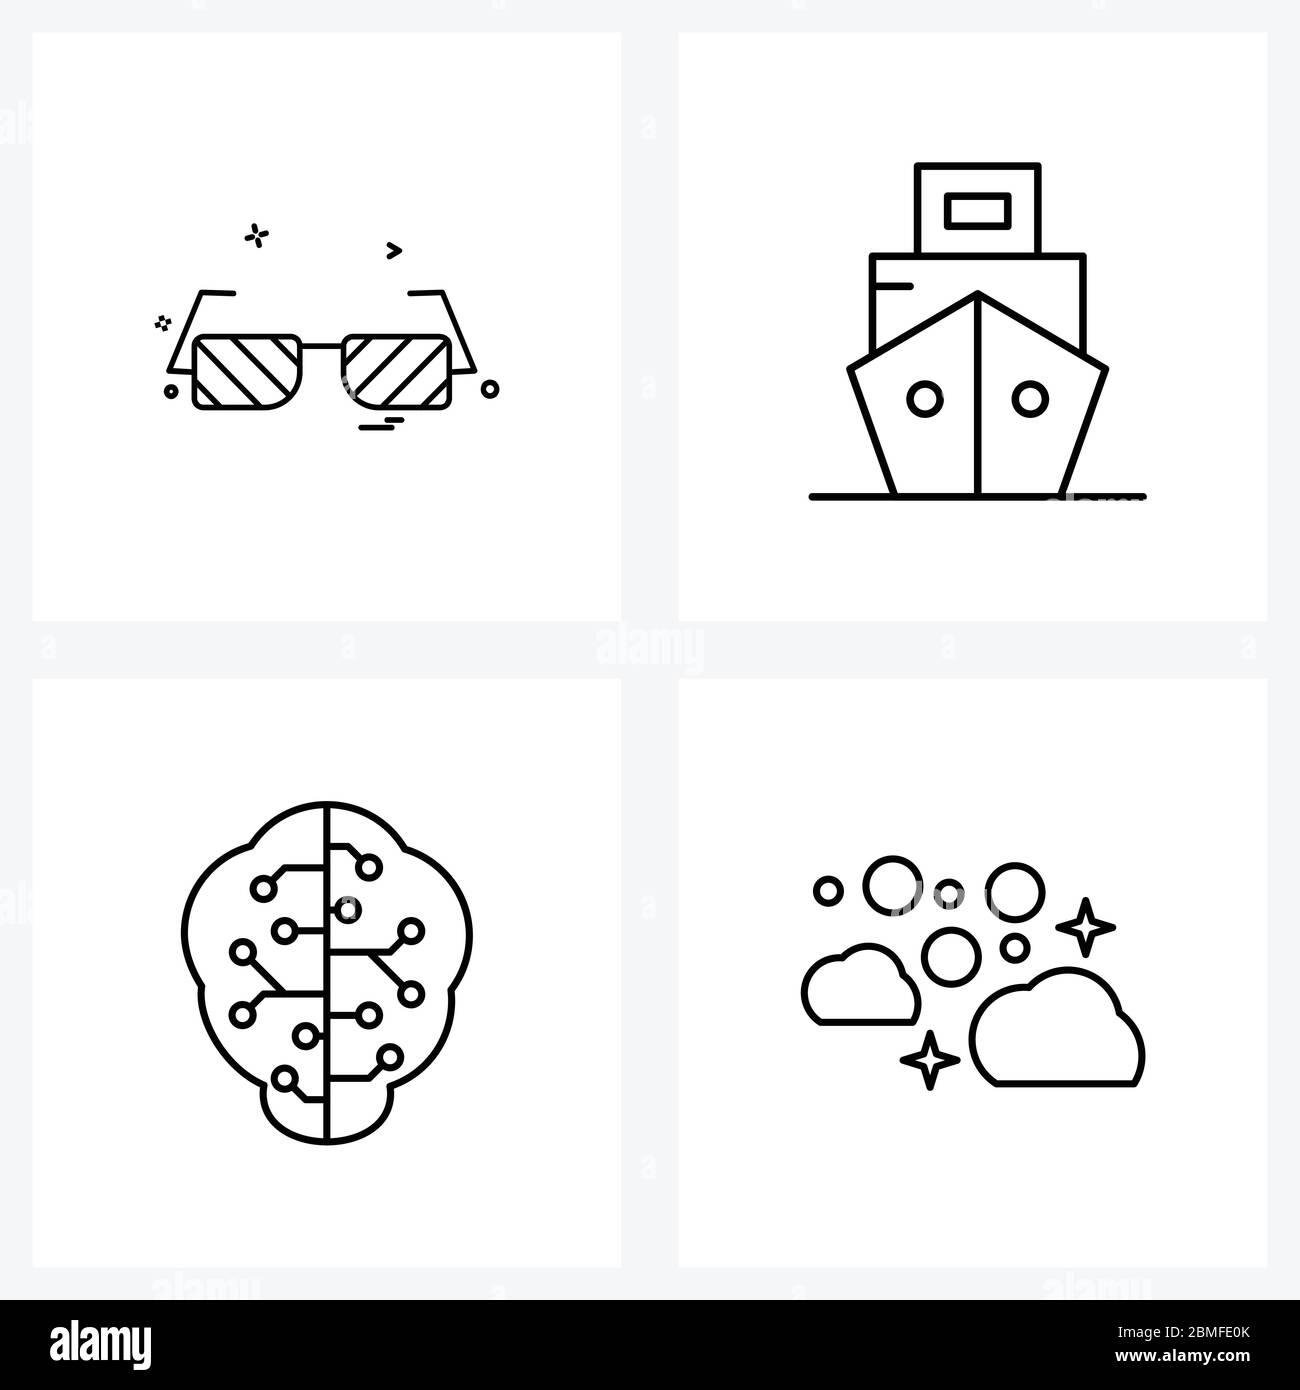 Set of 4 UI Icons and symbols for glasses, ic, ship, clean Vector Illustration Stock Vector